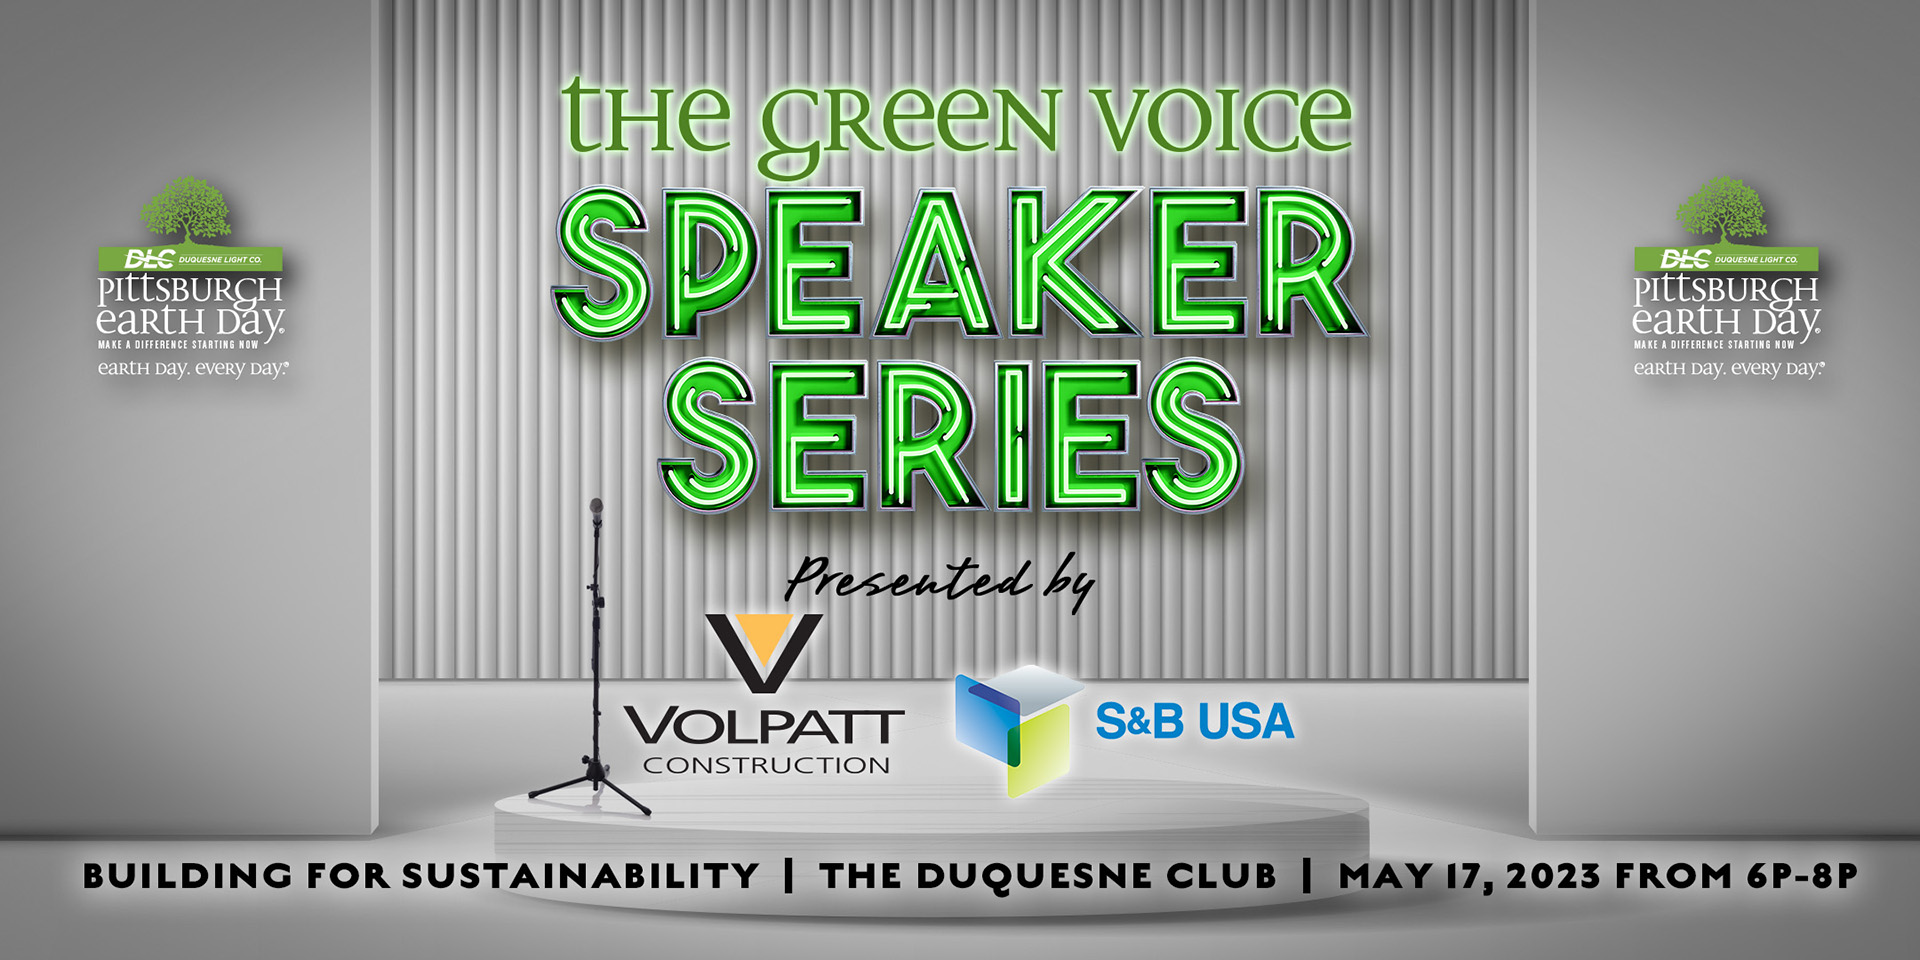 Building for Sustainability - The Duquesne Club - Green Voice Speaker Series